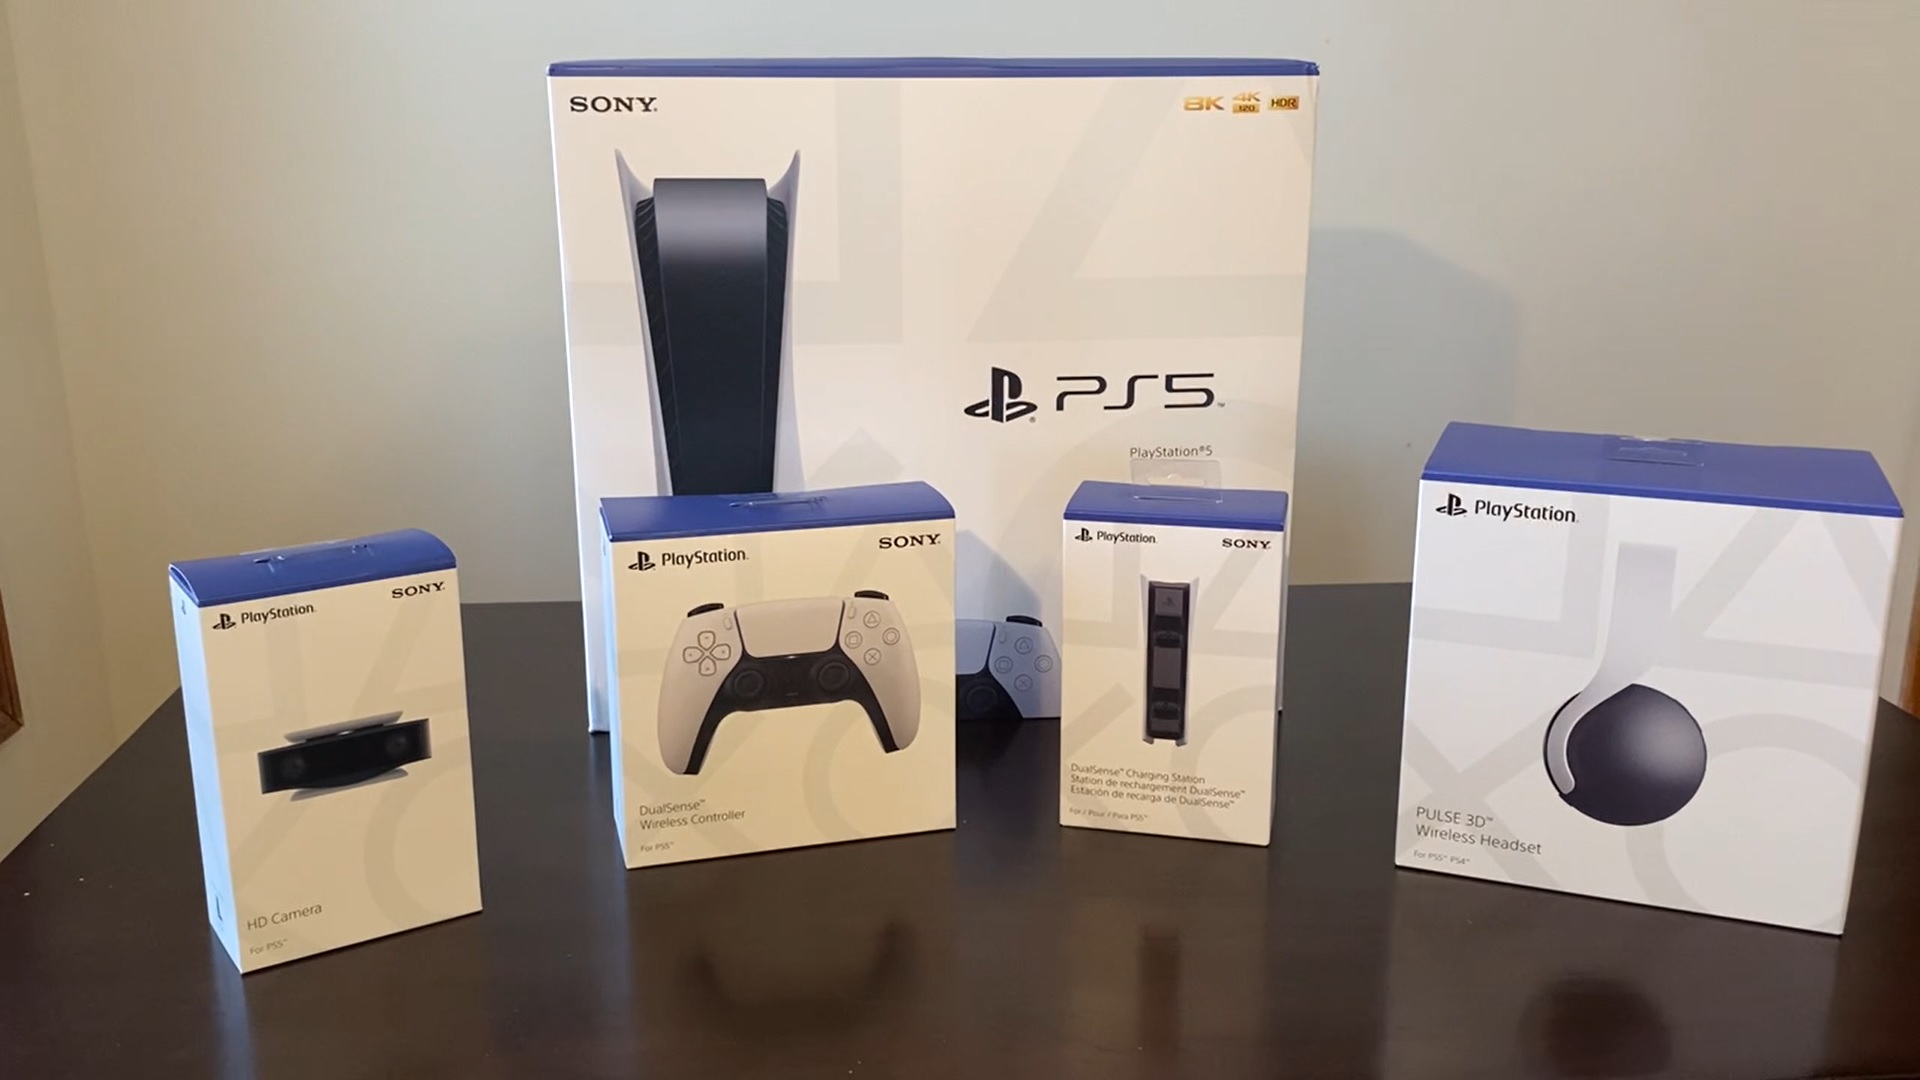 The PS5 Unboxing - Sony PlayStation 5 Next Gen Console 